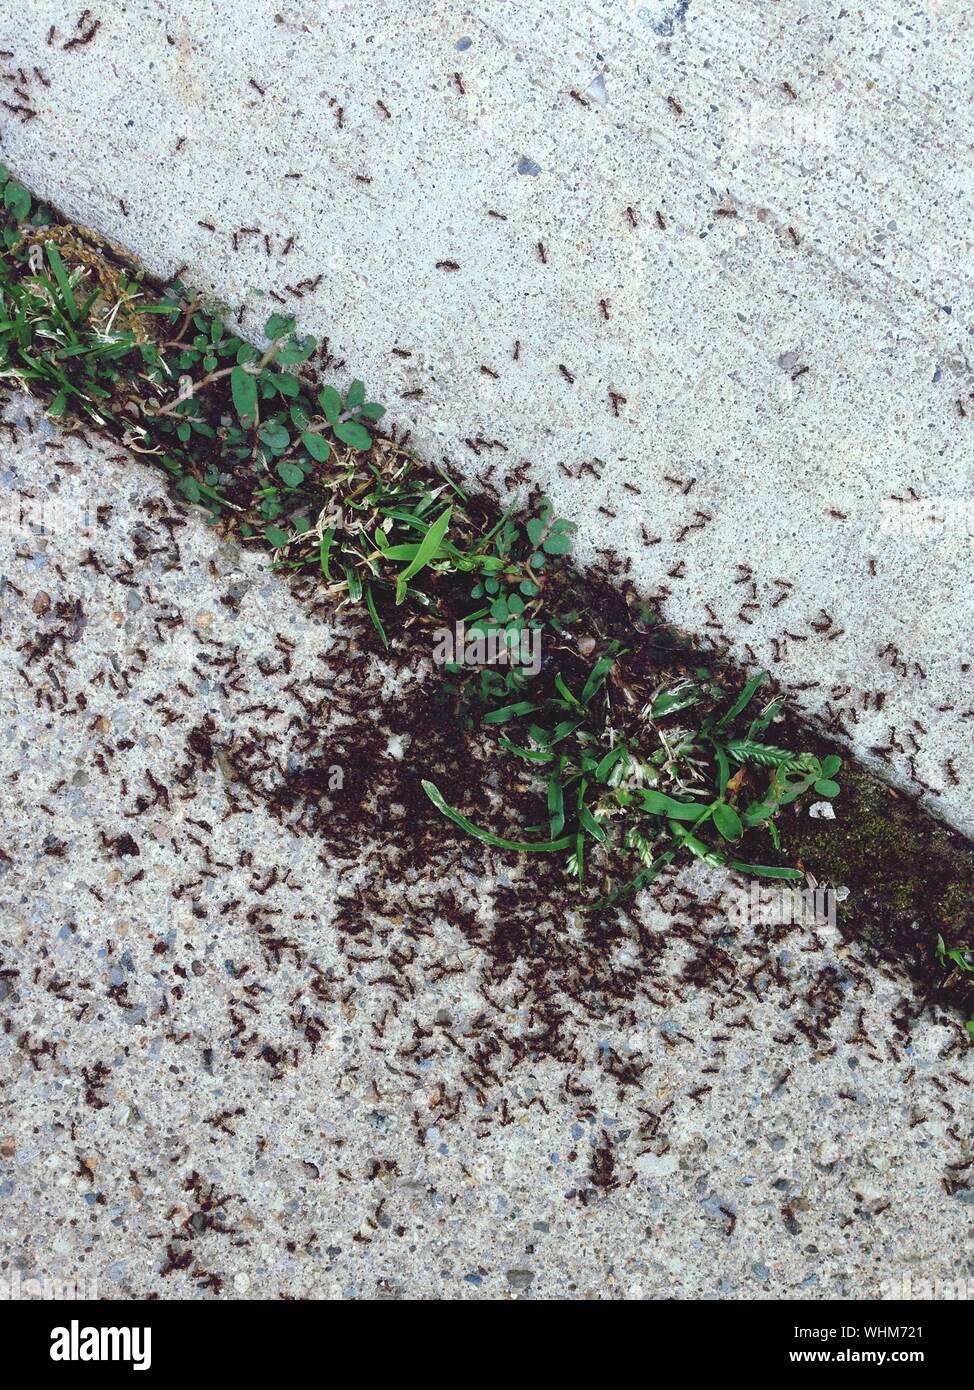 Colony Of Ants Transporting Leaves Stock Photo